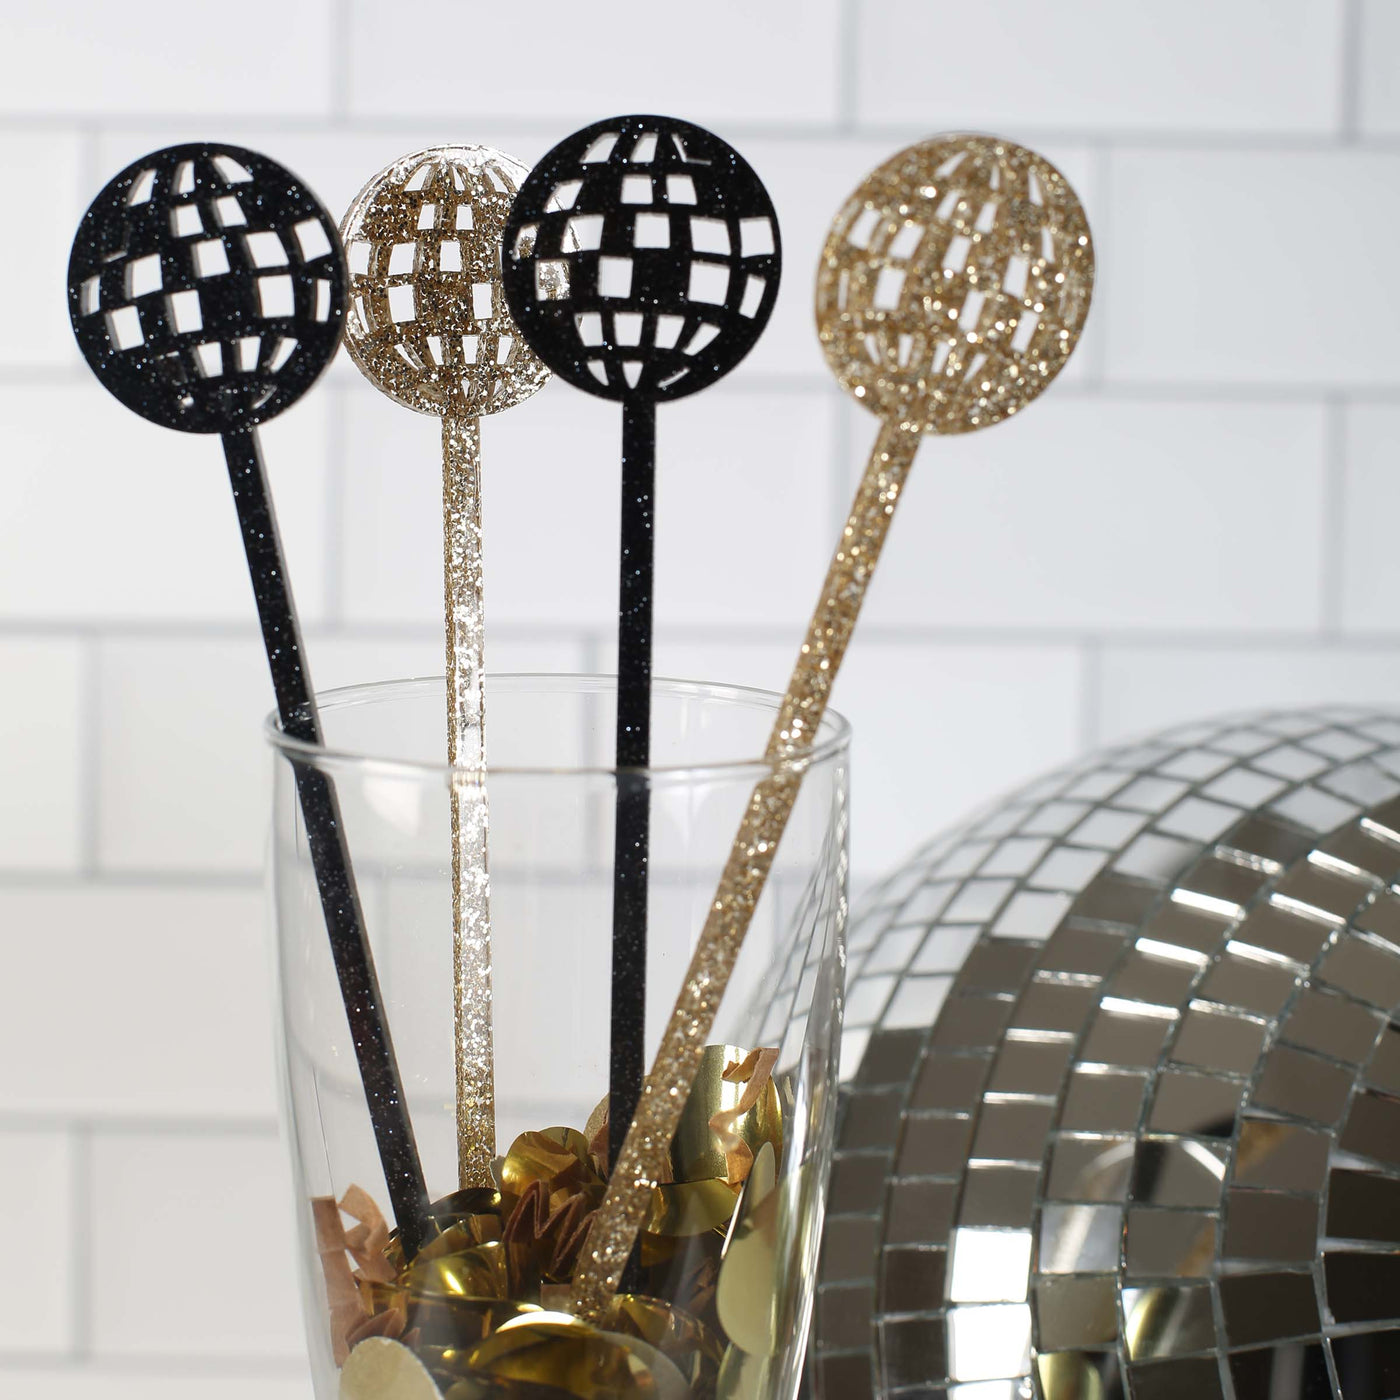 Acrylic disco ball glitter beverage mixing stir sticks. Cocktail swizzle sticks for new years eve, holidays, 70's theme party, bachelorette parties, birthdays or just to jazz up your bar. black and gold glitter colors.